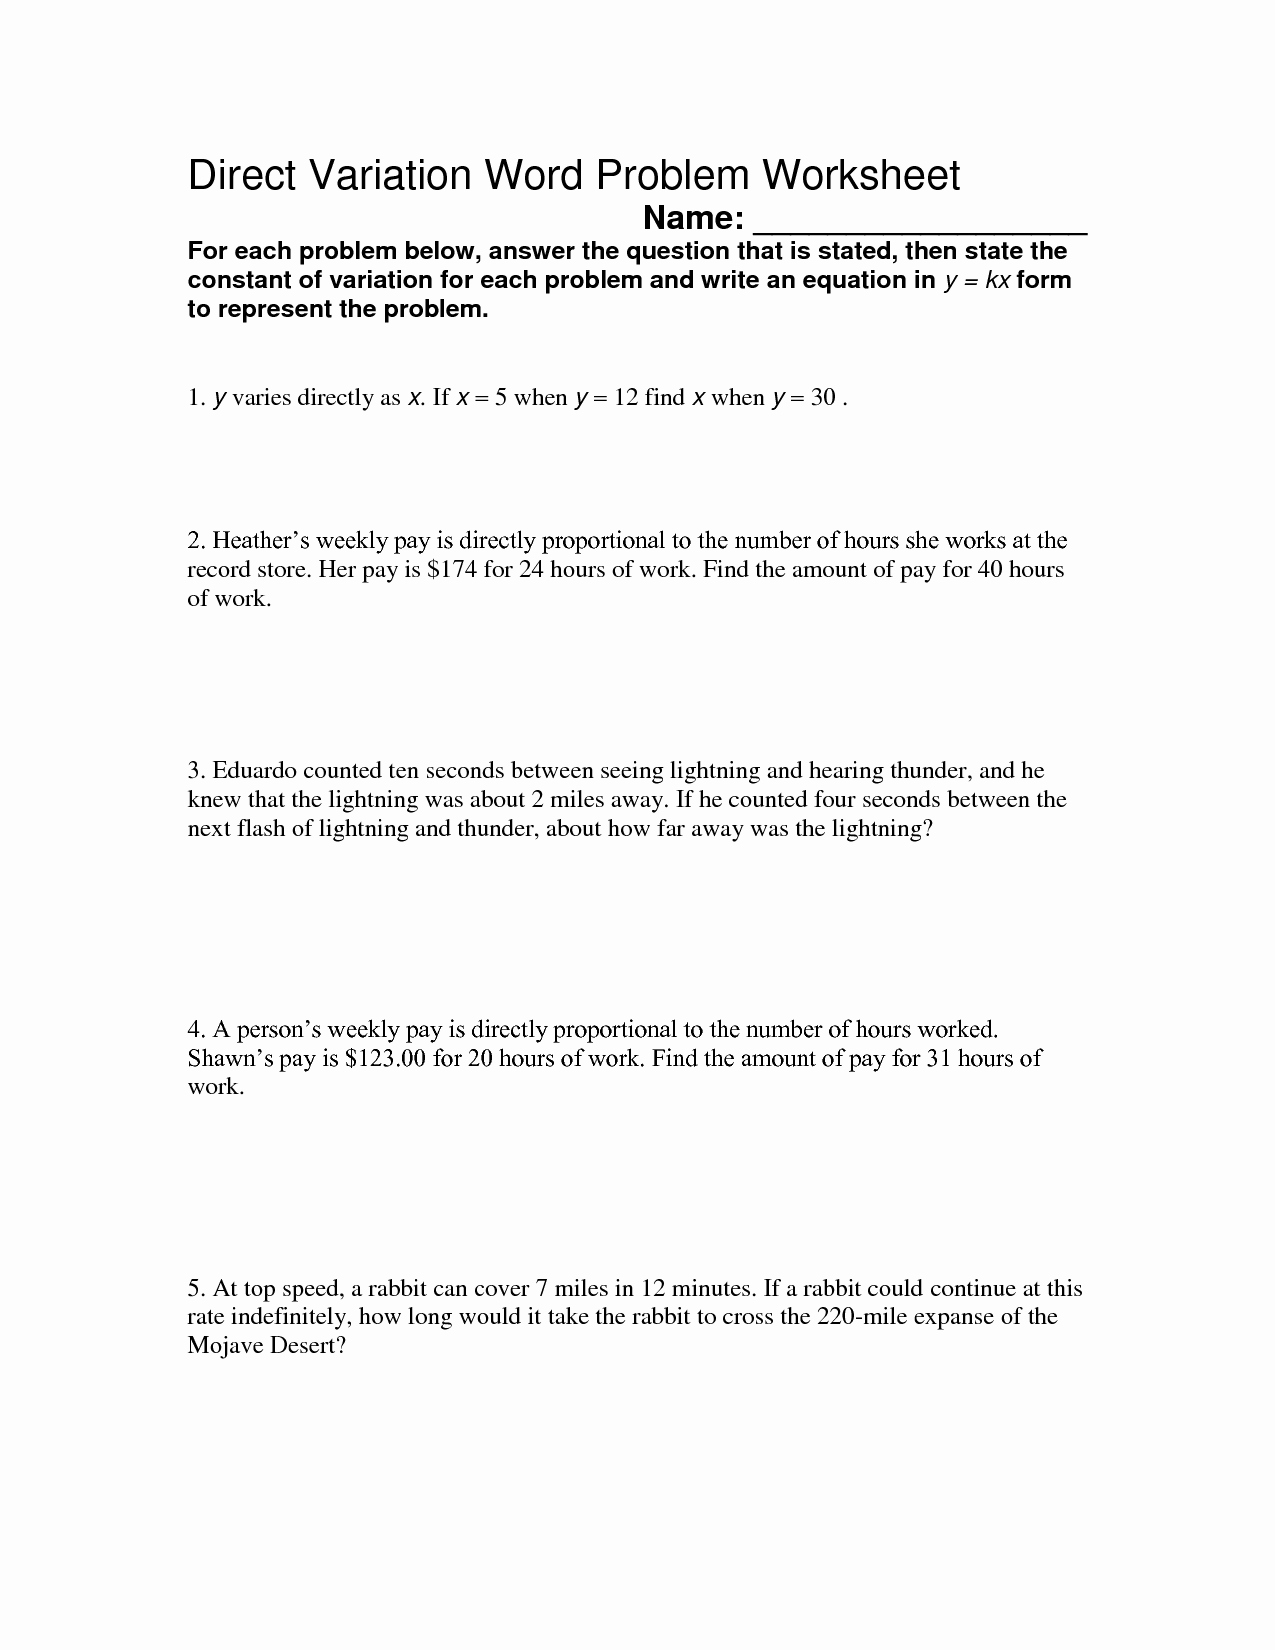 Direct Variation Worksheet with Answers Fresh 14 Best Of Direct Variation Worksheets Printable